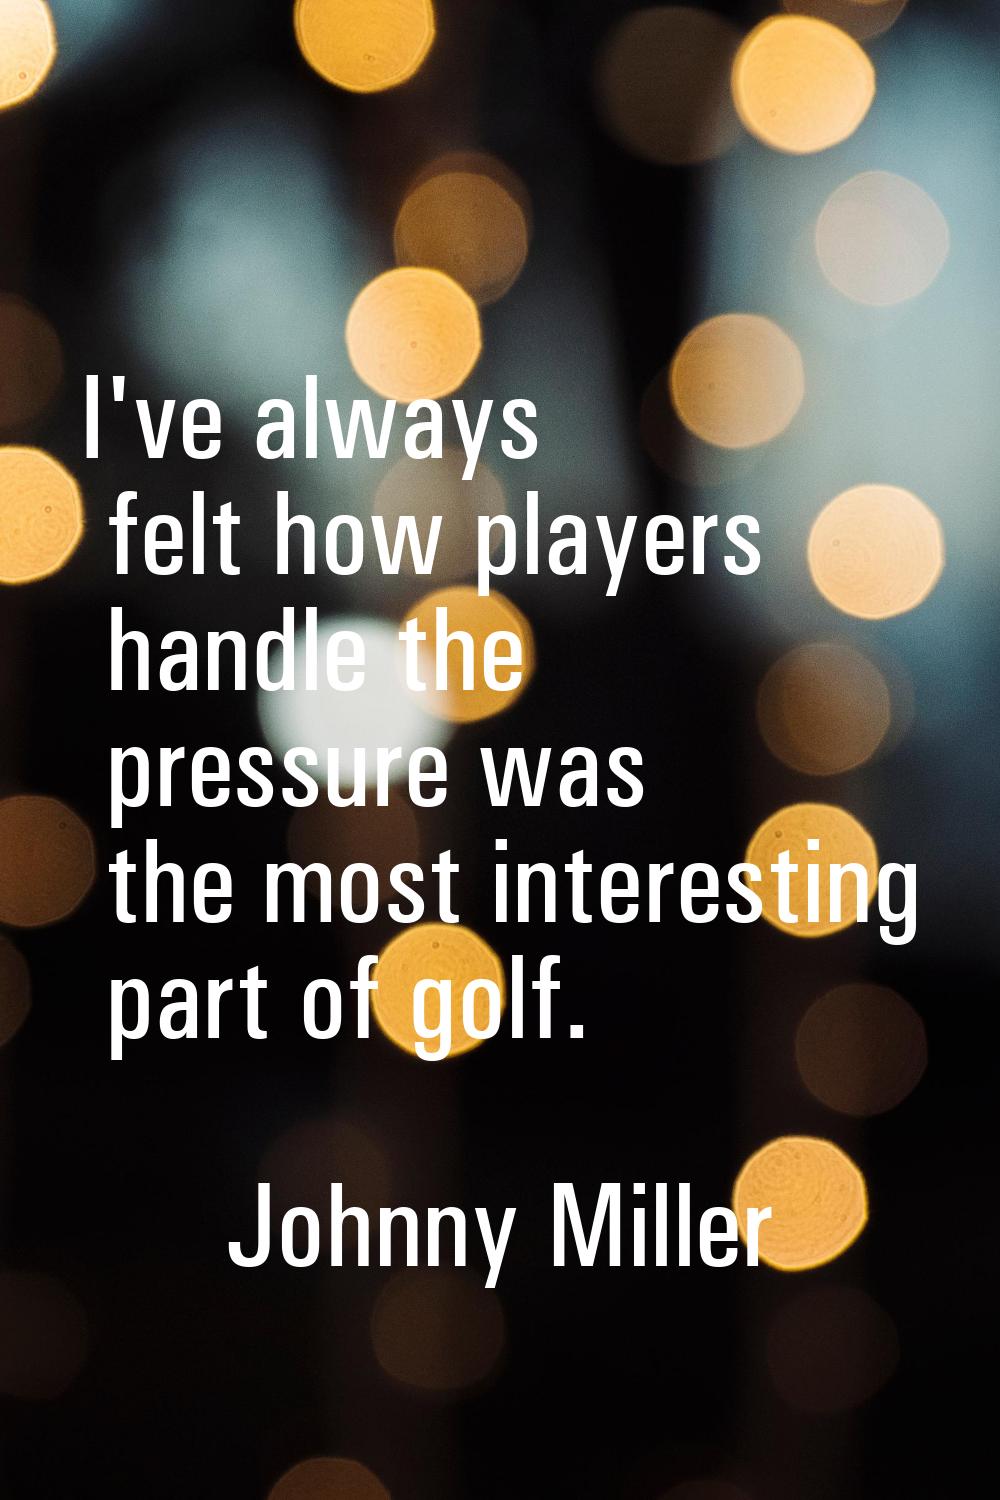 I've always felt how players handle the pressure was the most interesting part of golf.